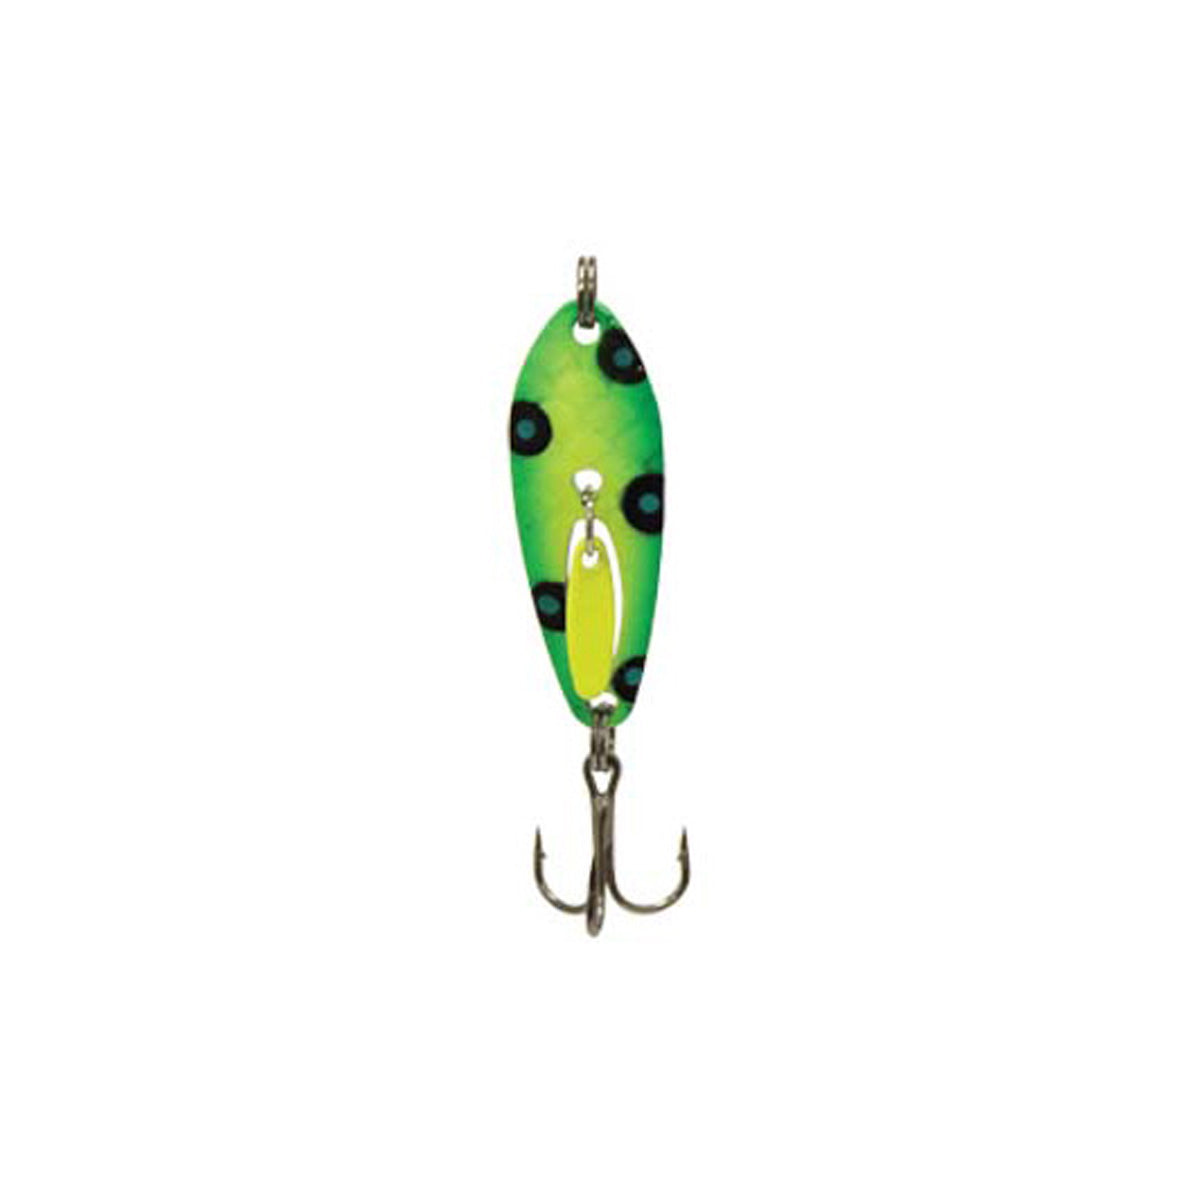 Winter Fishing Lure Clearance From Walmart - Winter Fishing Deals